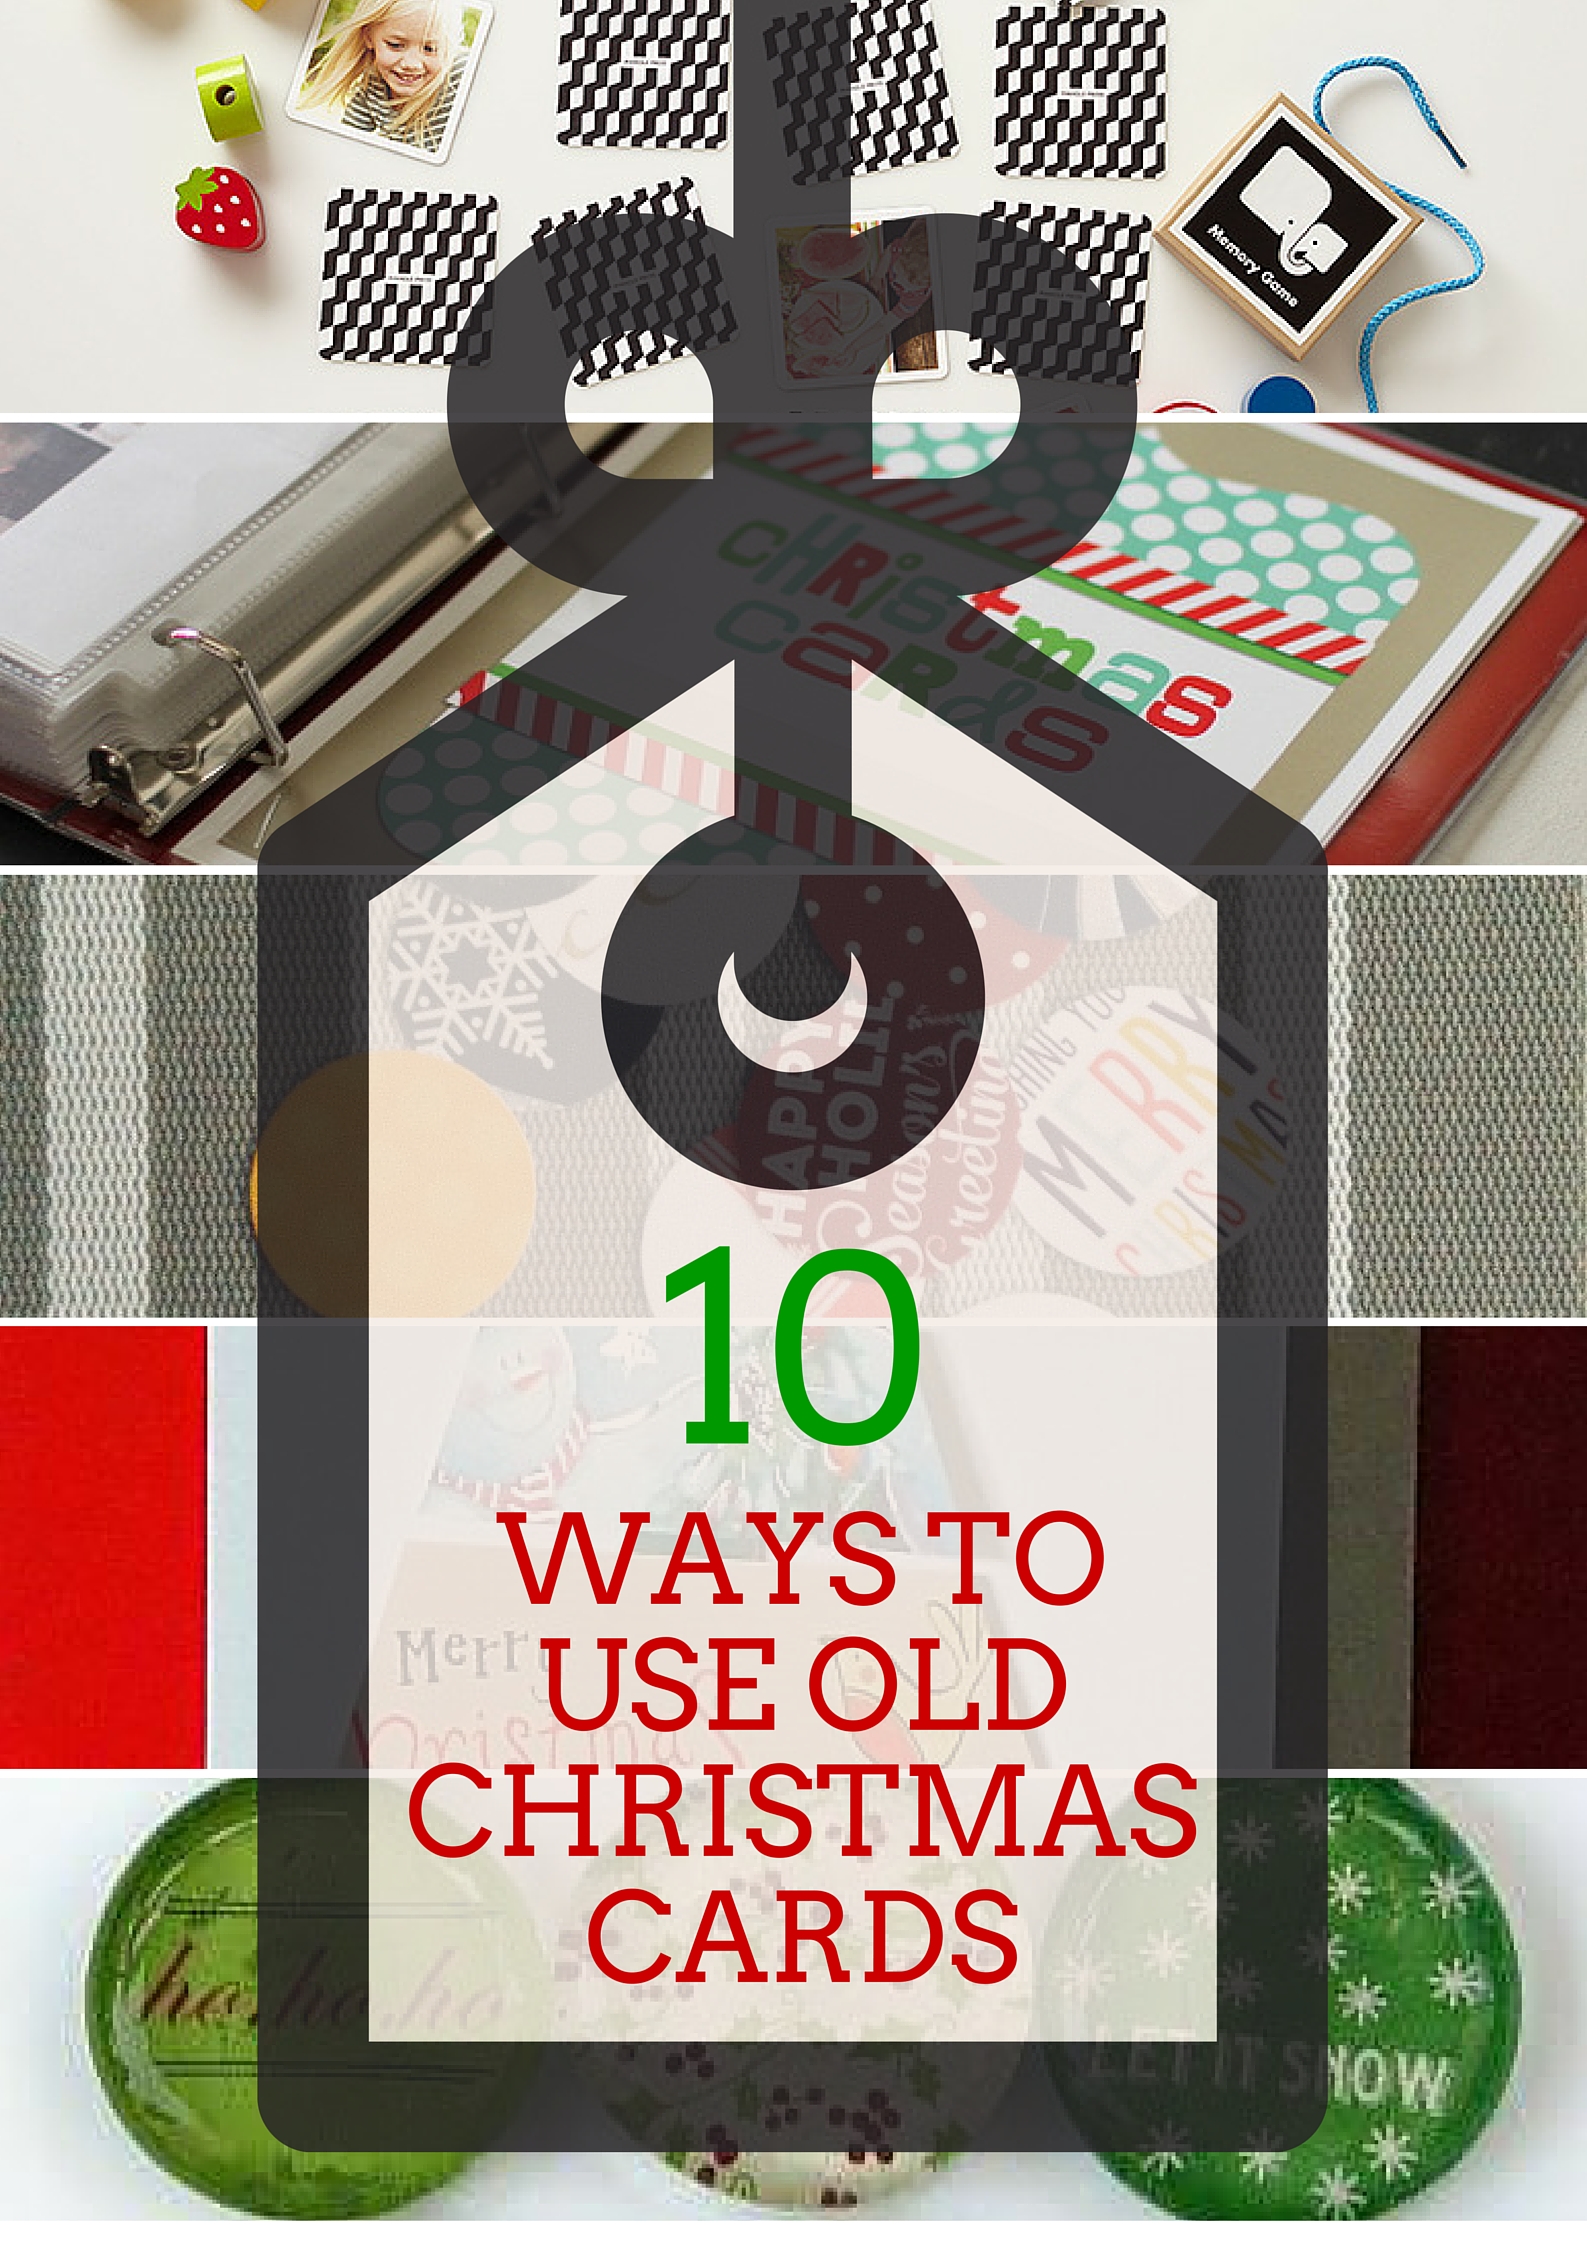 10 Ways to Use Old Christmas Cards